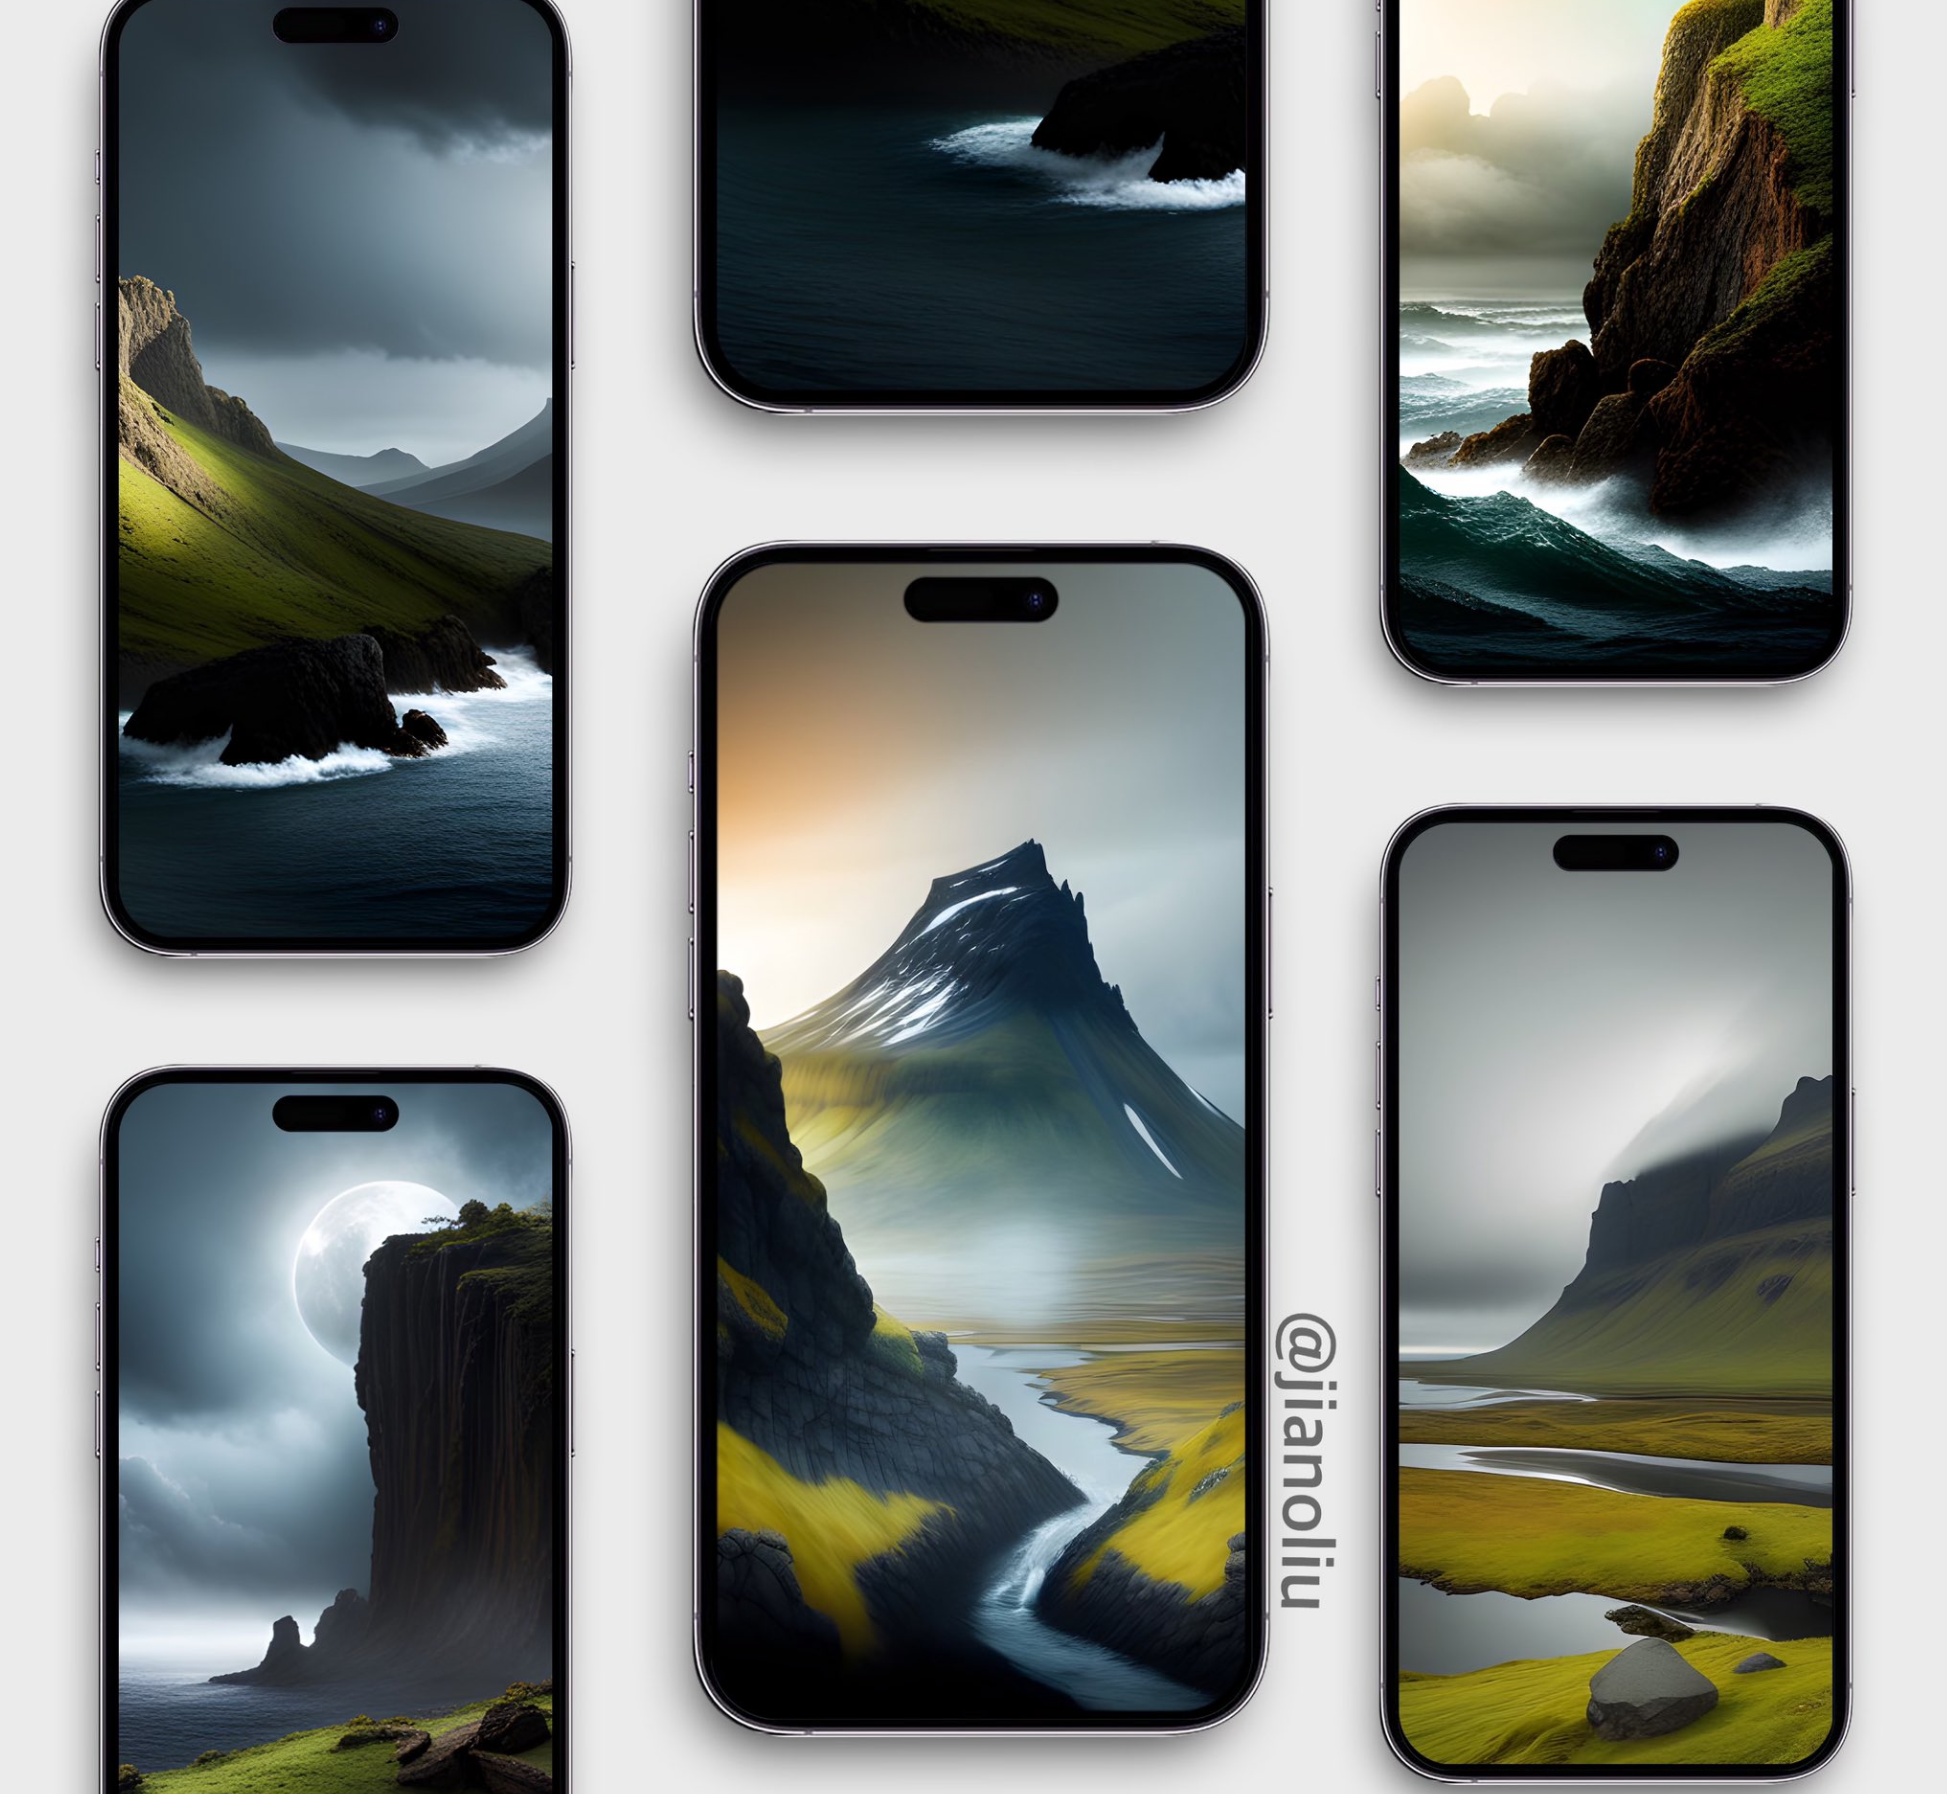 Mountains by the sea iPhone wallpapers| Wallpapers For iPhone 15 series and 14 Pro Amazing Dynamic Island (Free download)